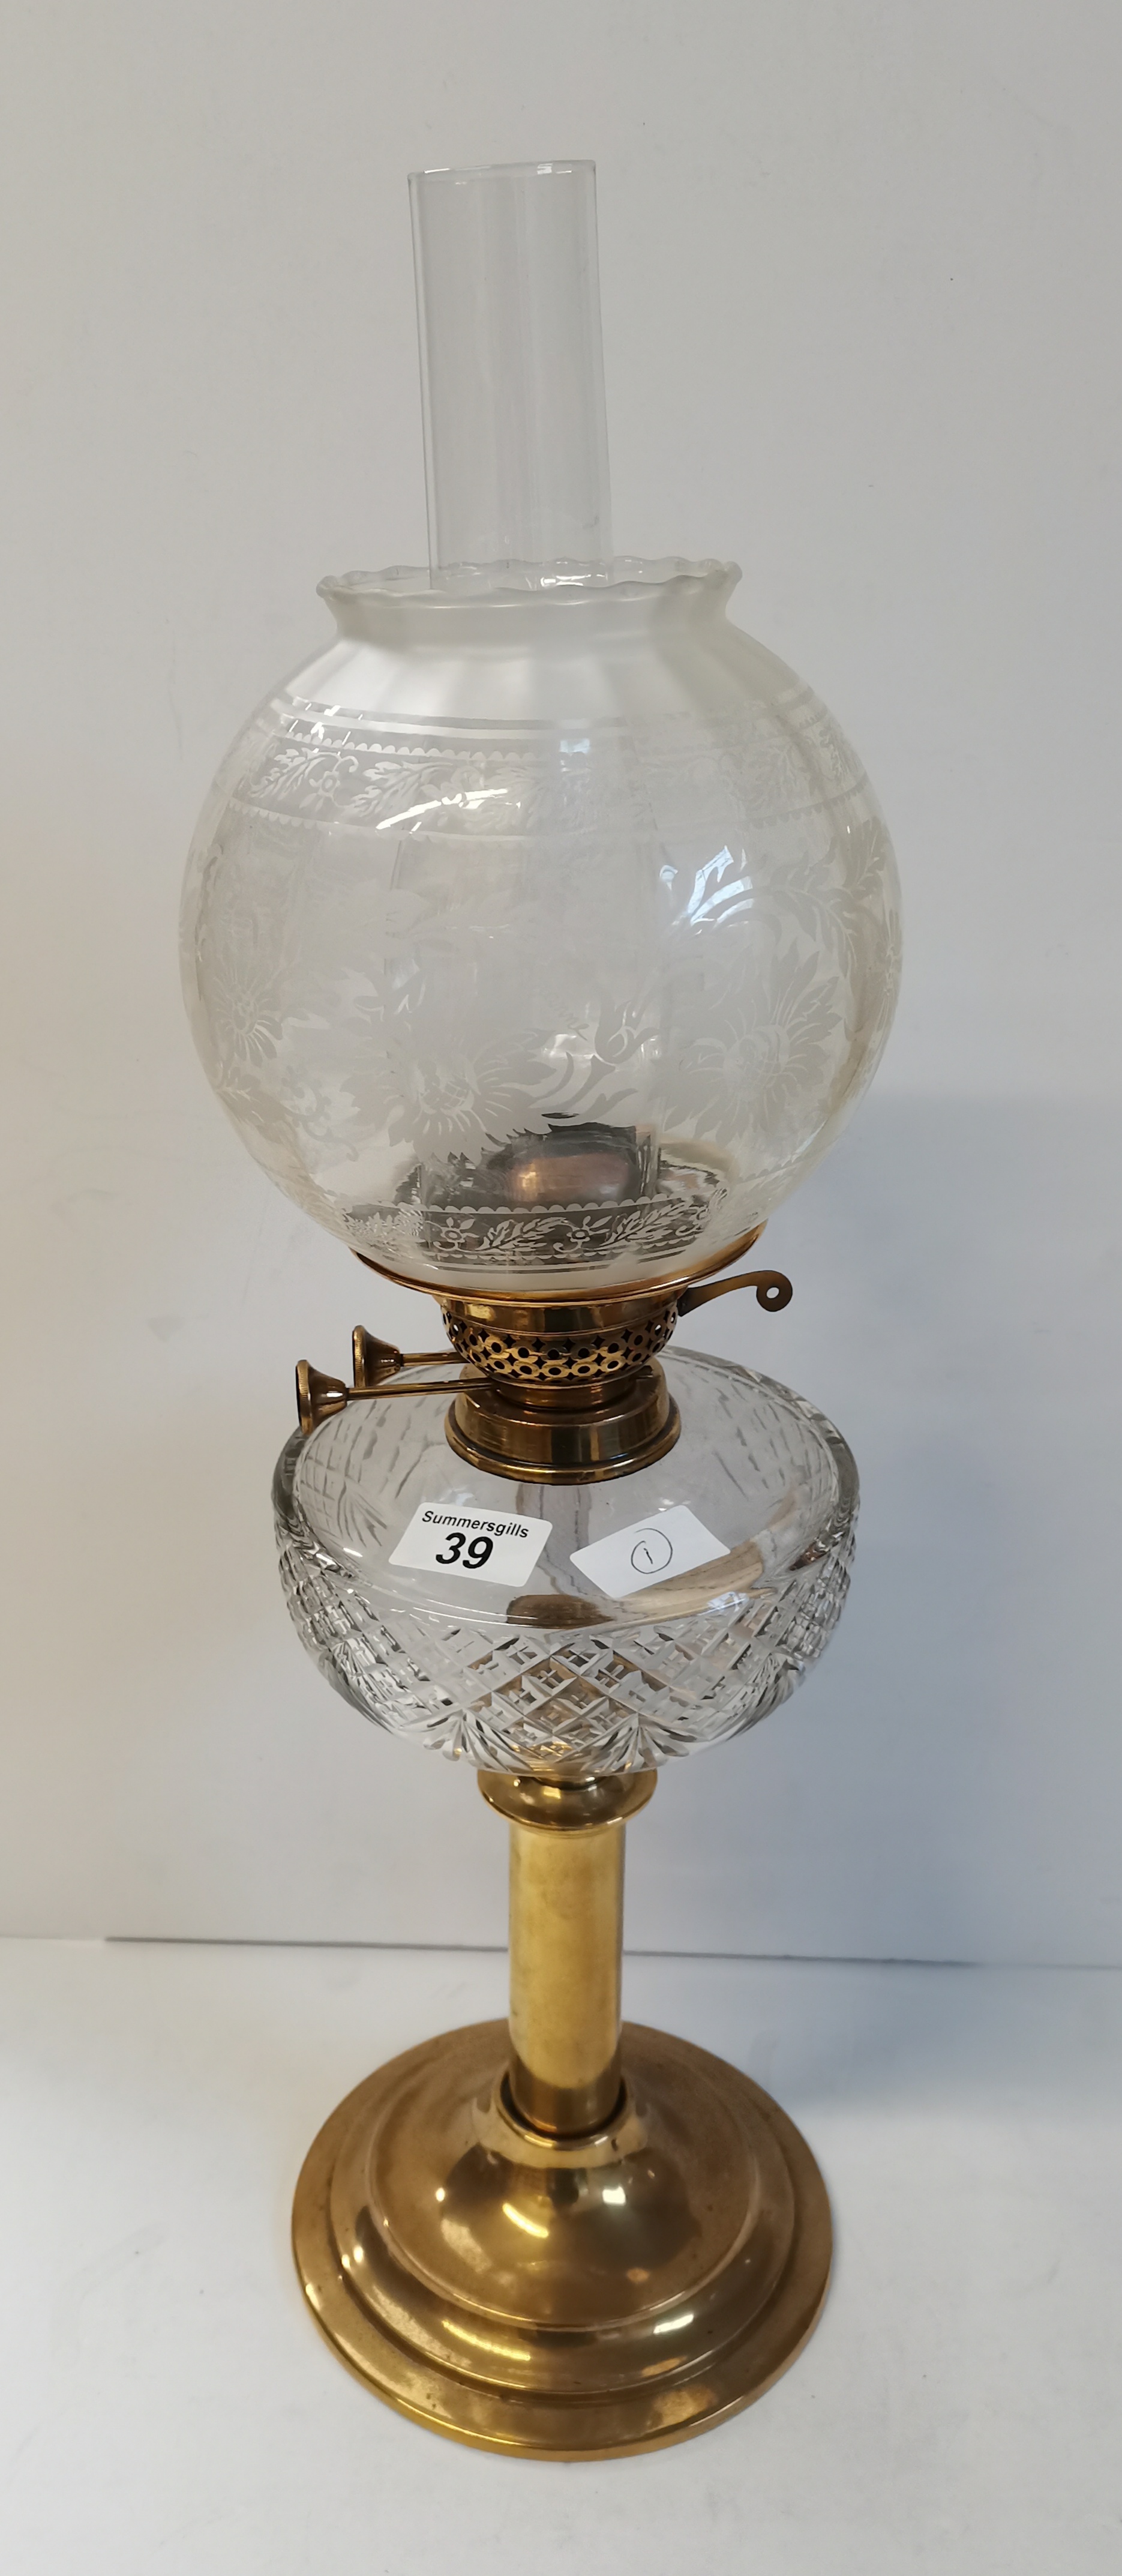 Ornate Etched glass and Brass Oil Lamp - Image 3 of 3